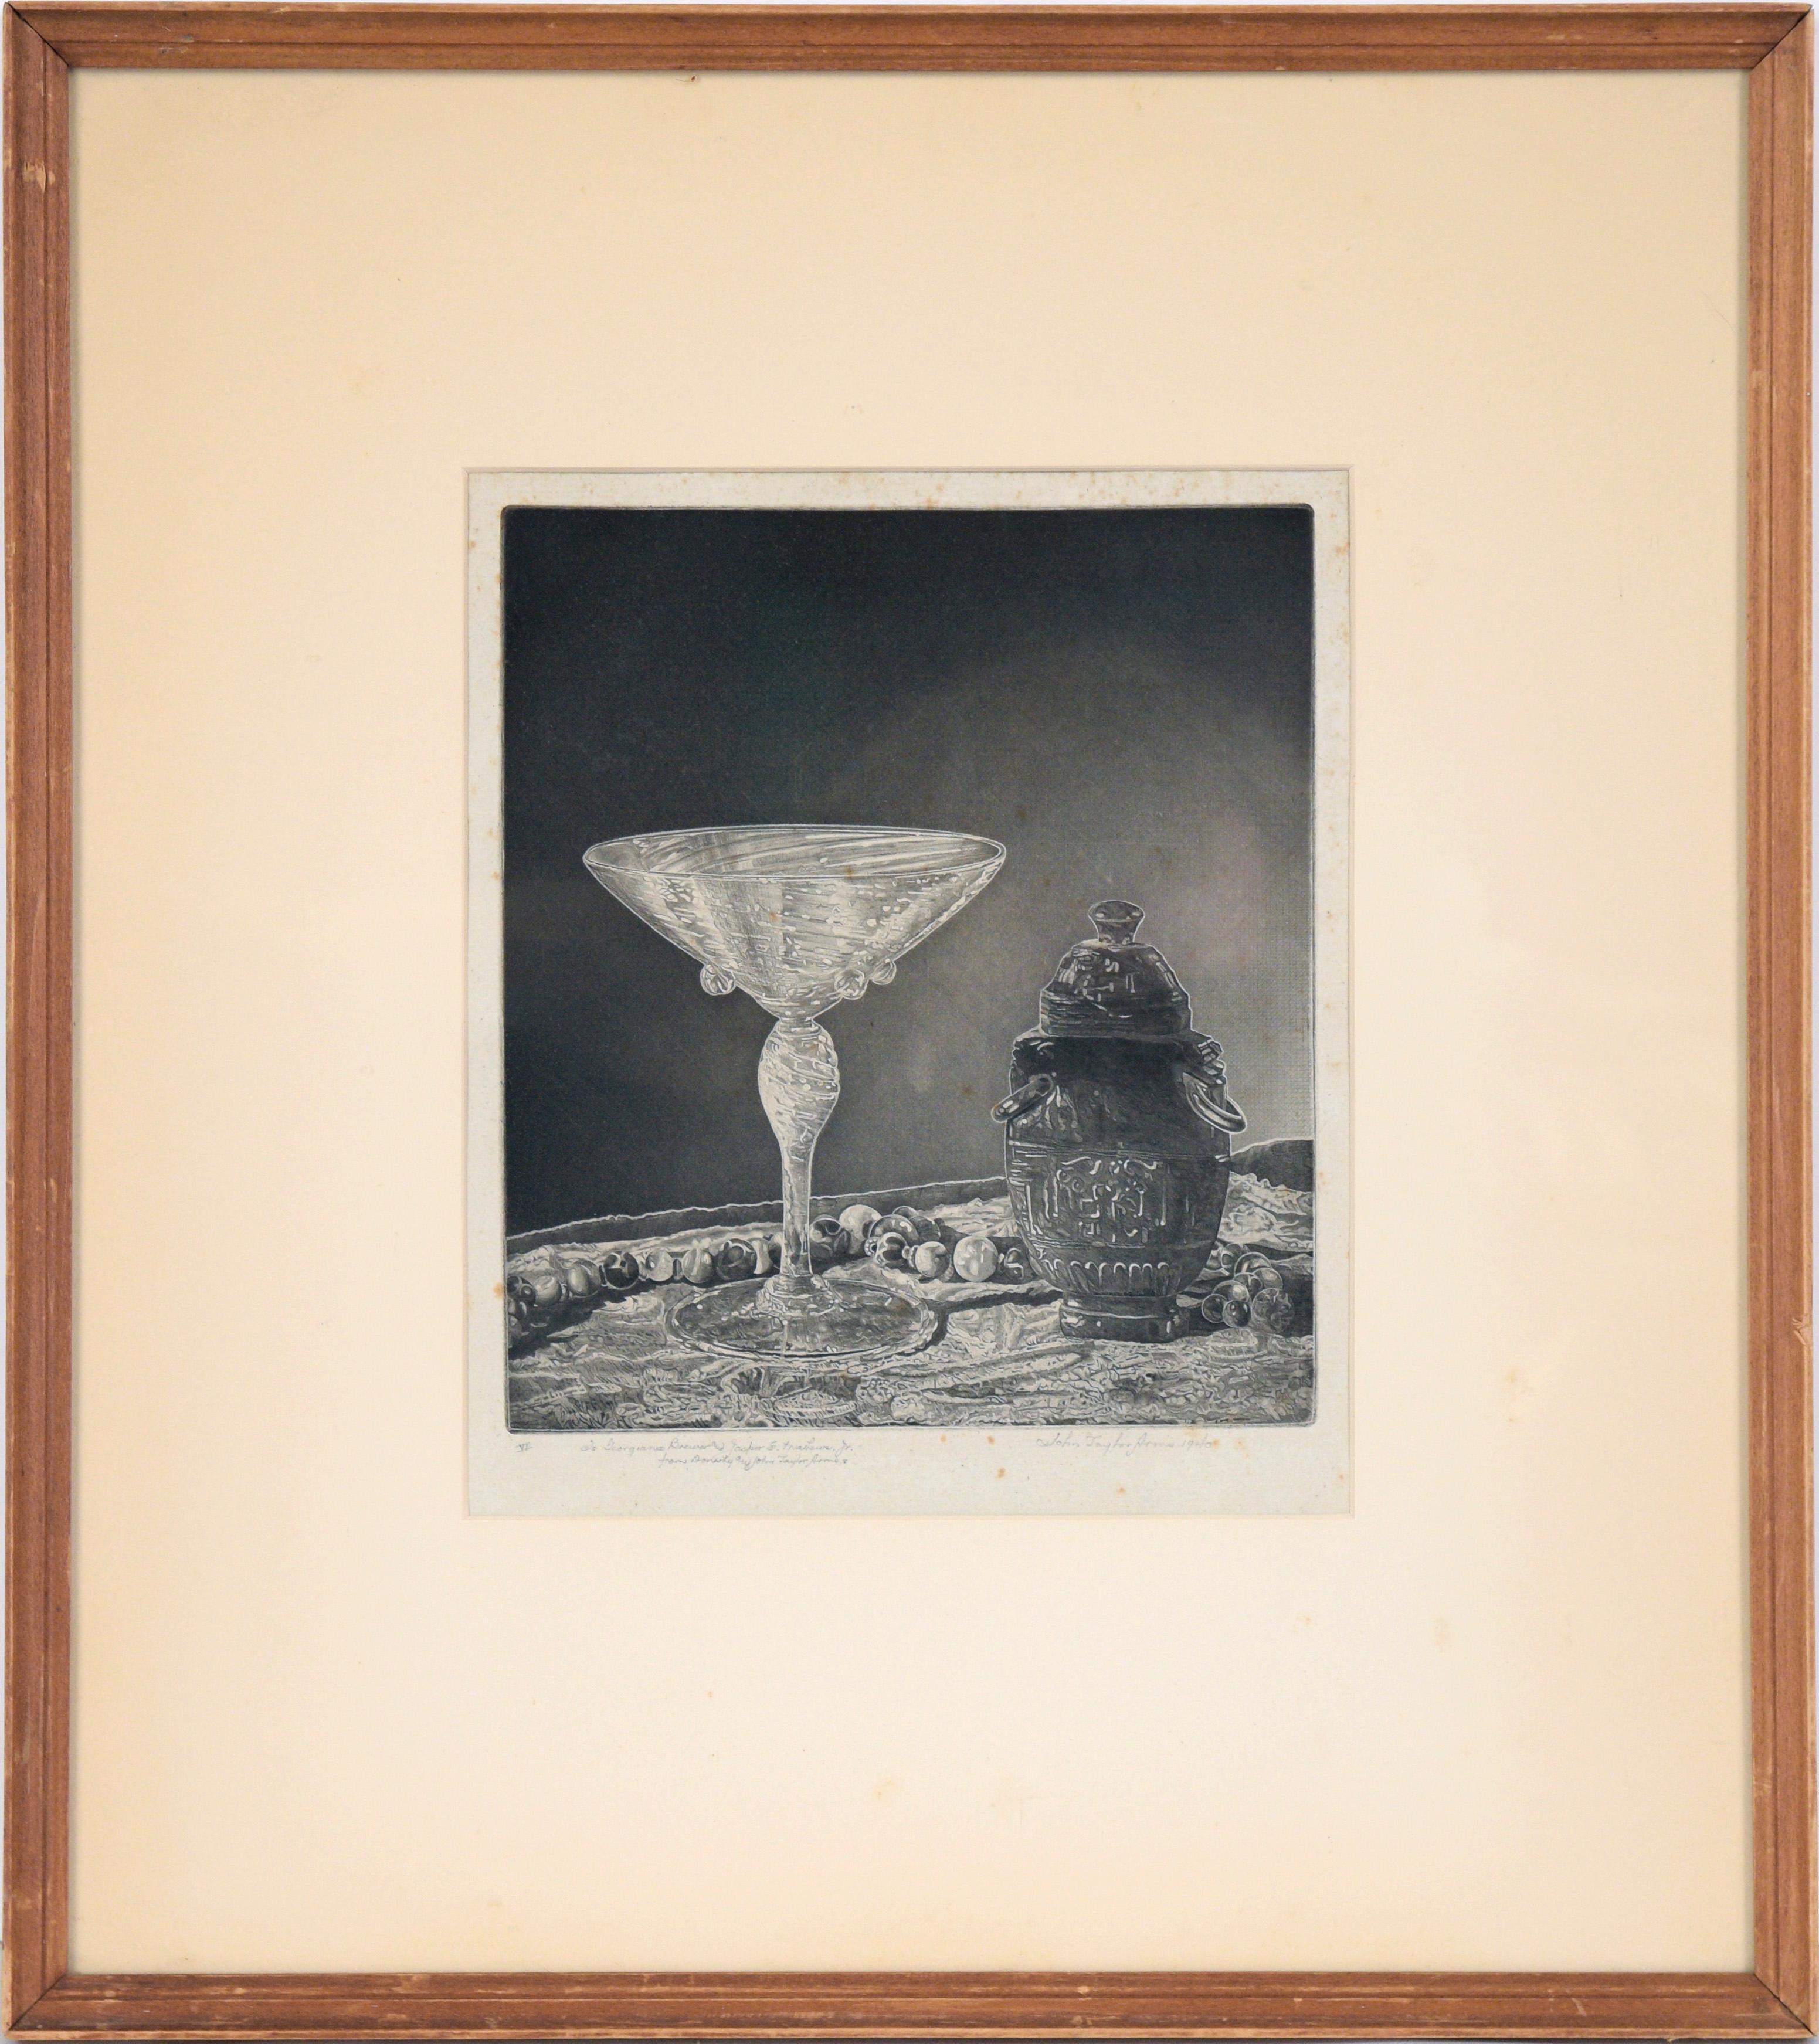 John Taylor Arms Interior Print - "Crystal and Jade" Still Life Lithograph in Ink on Paper